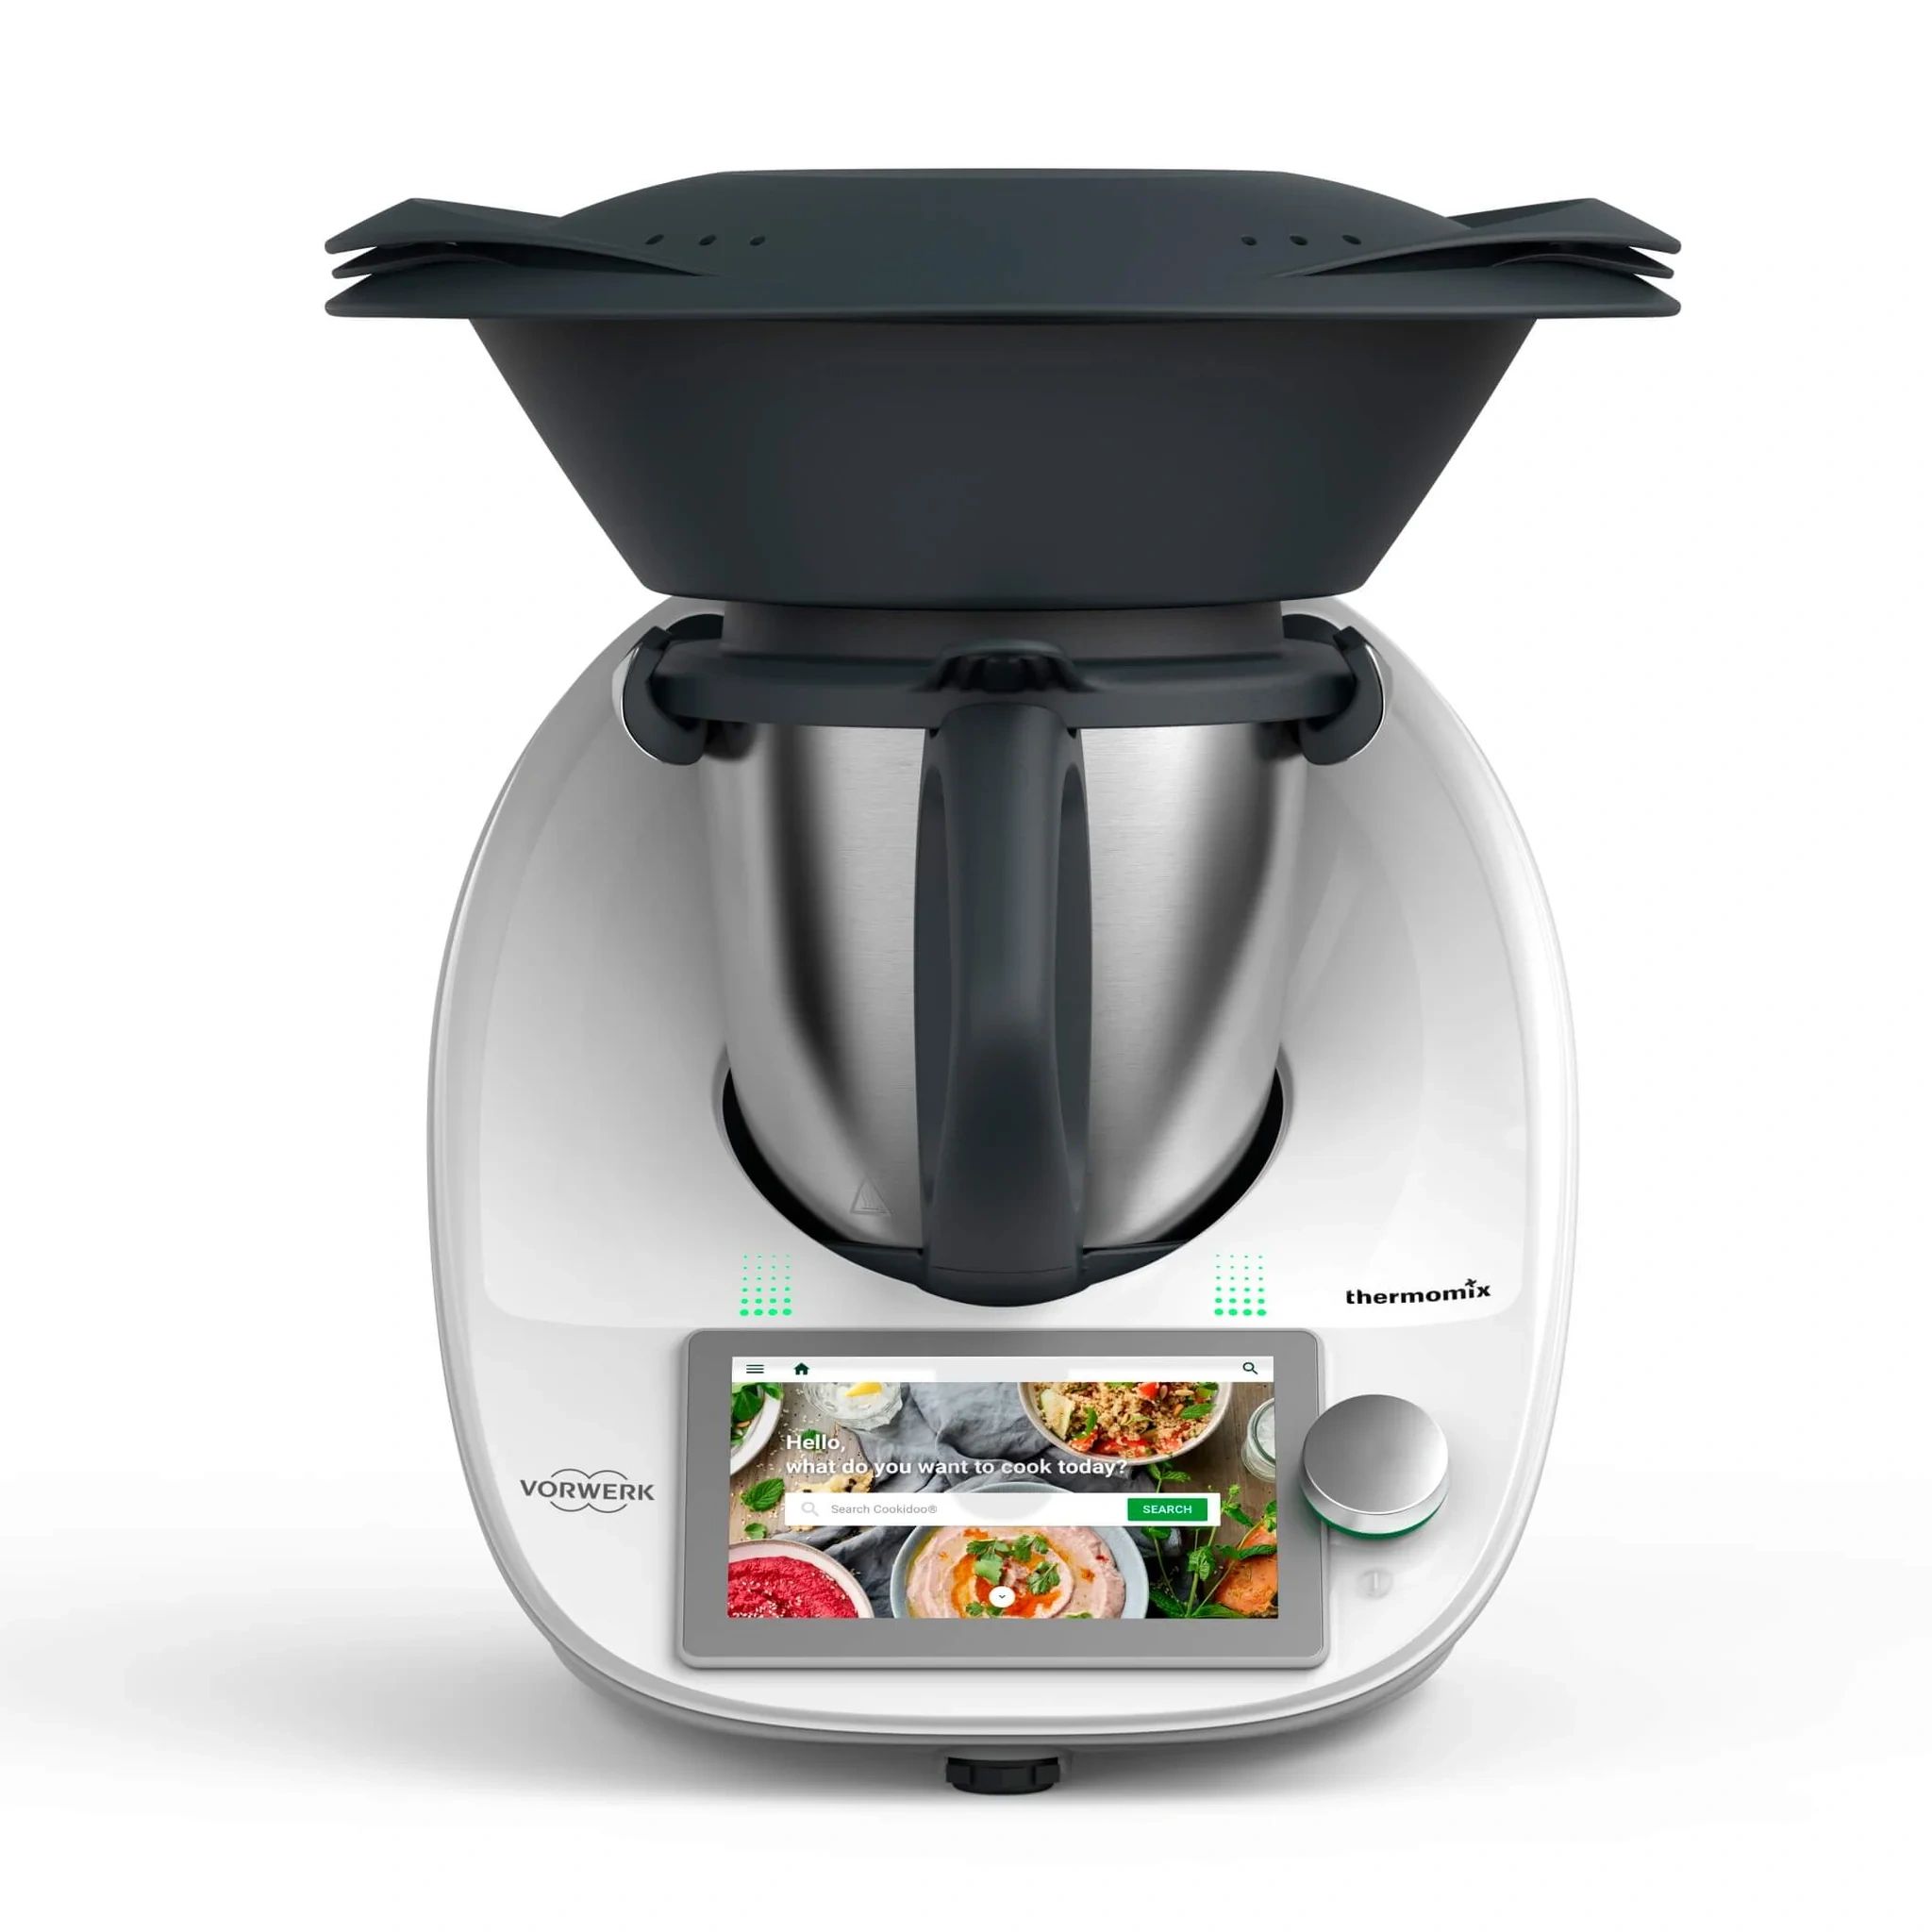 The GHI's Thermomix review: is this hyped multi-cooker worth £1000?